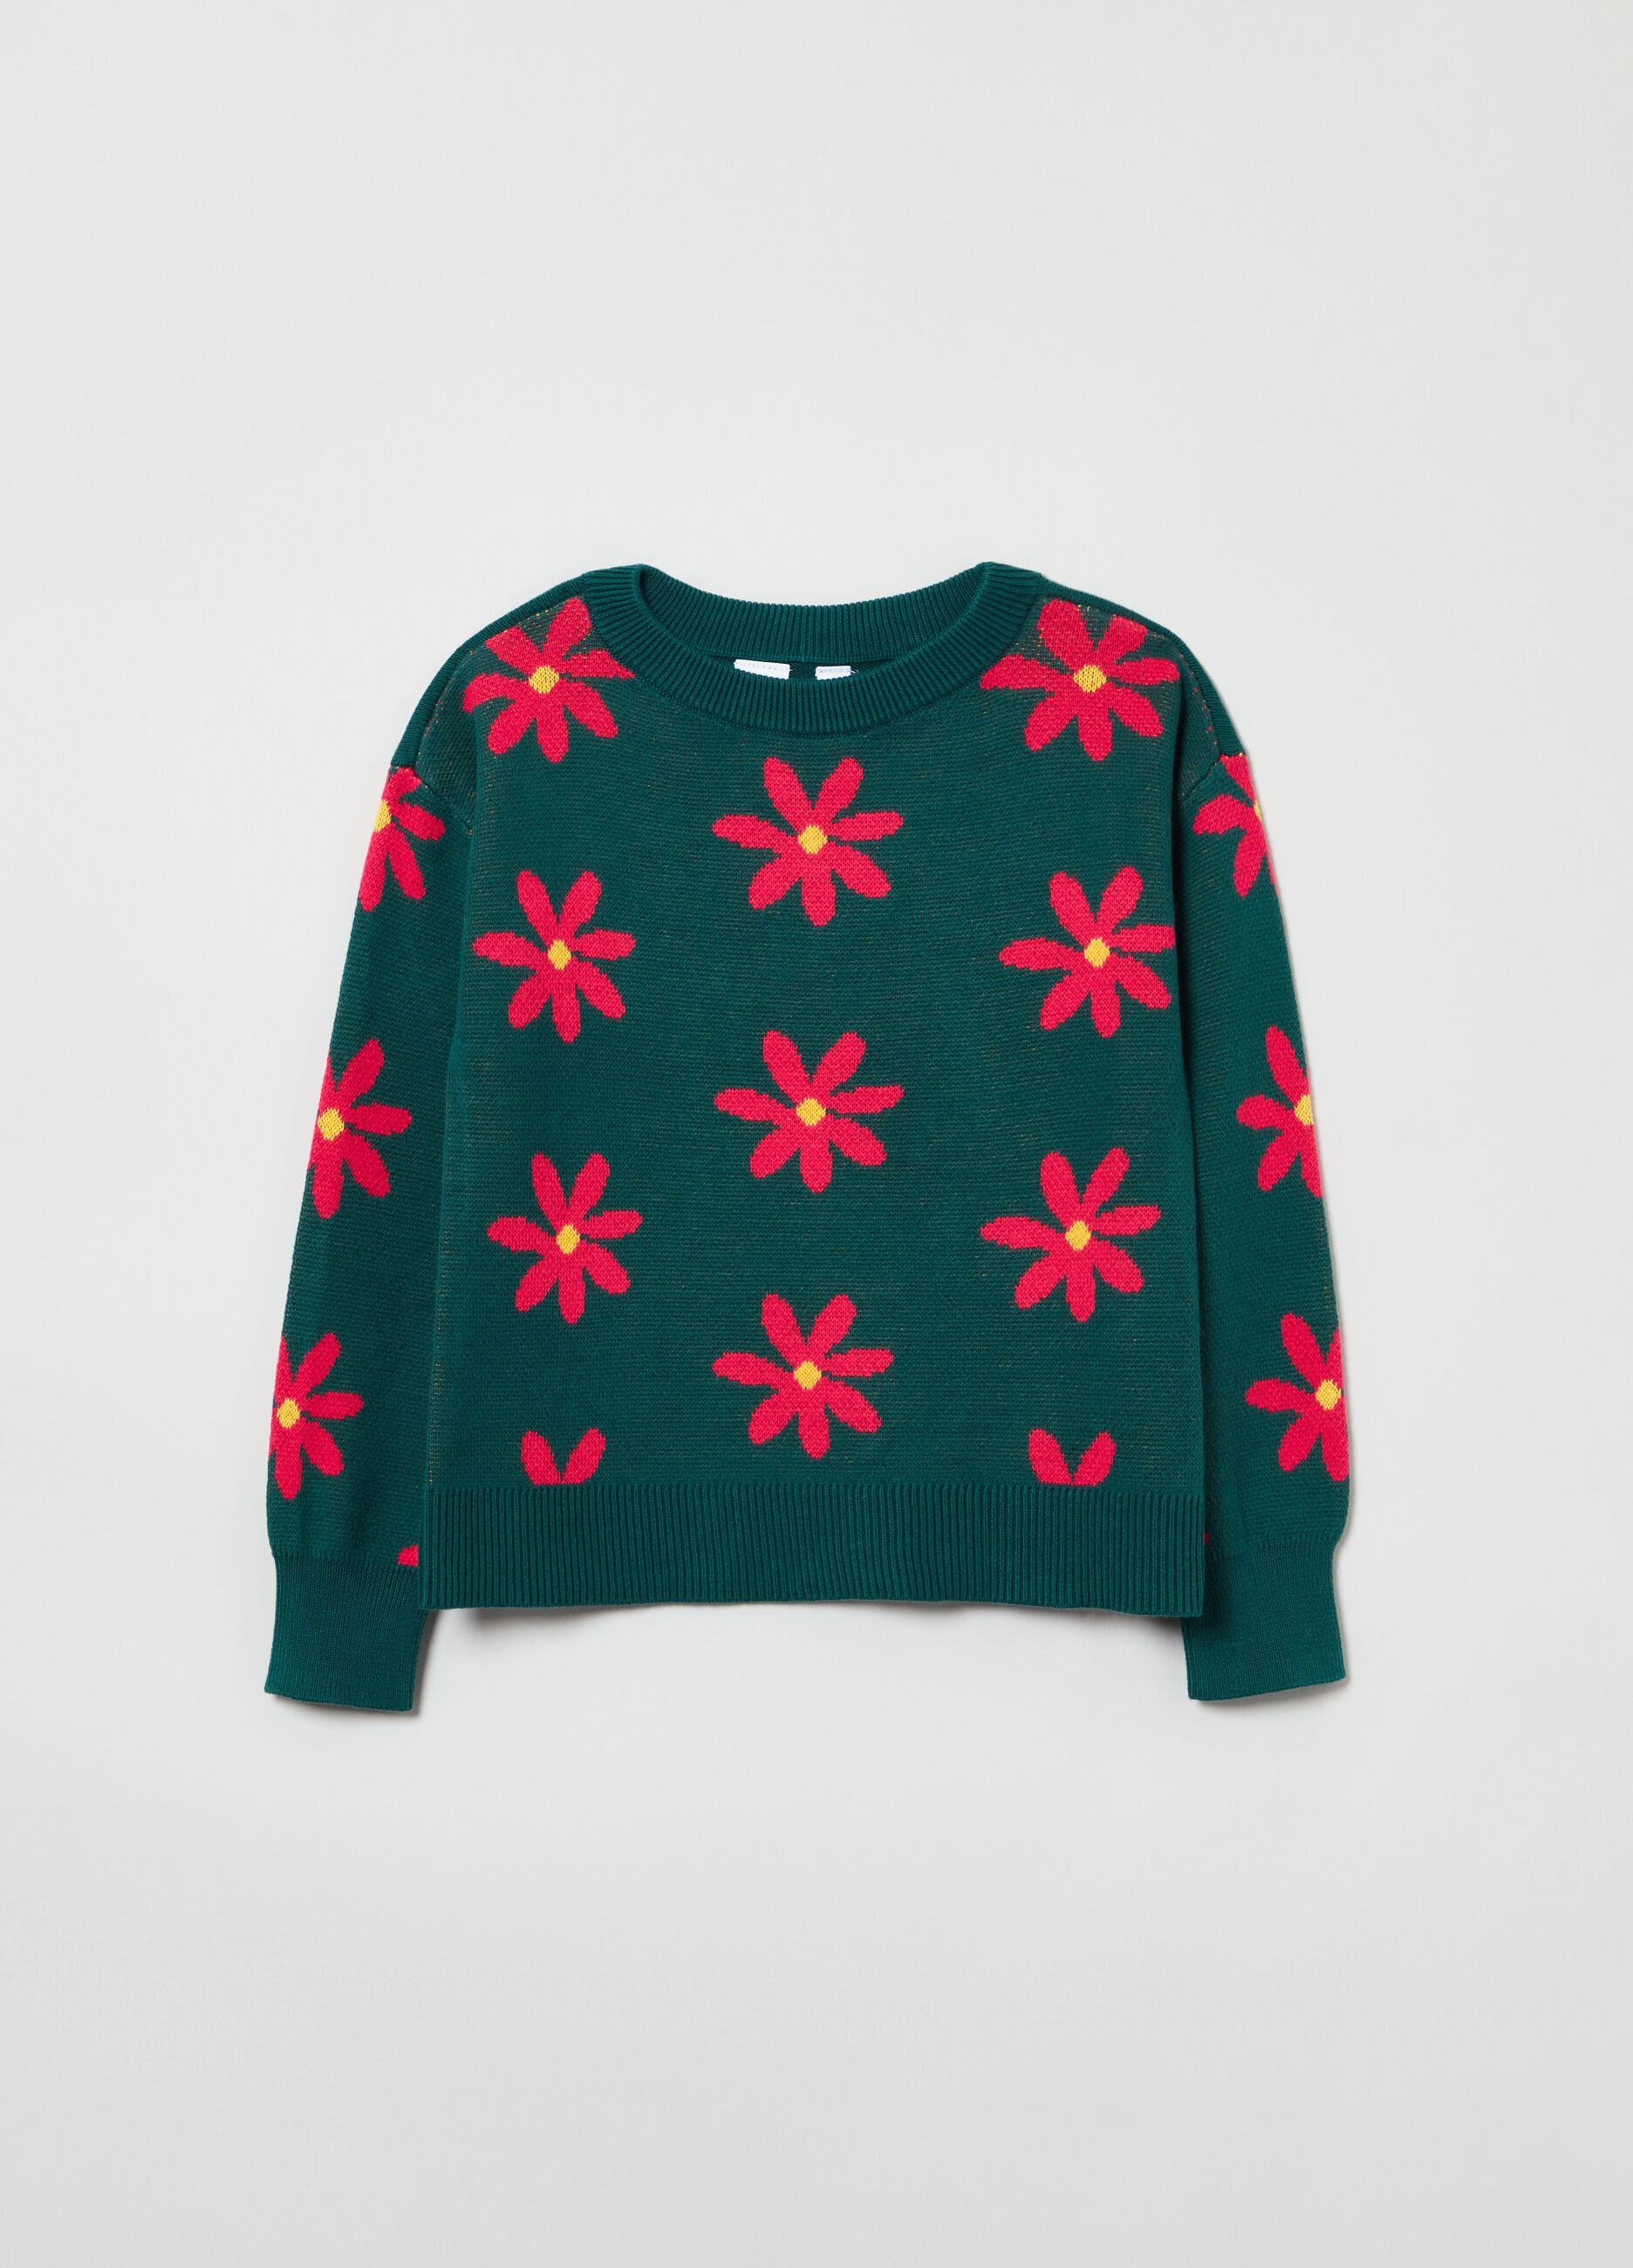 Pullover with jacquard flowers design